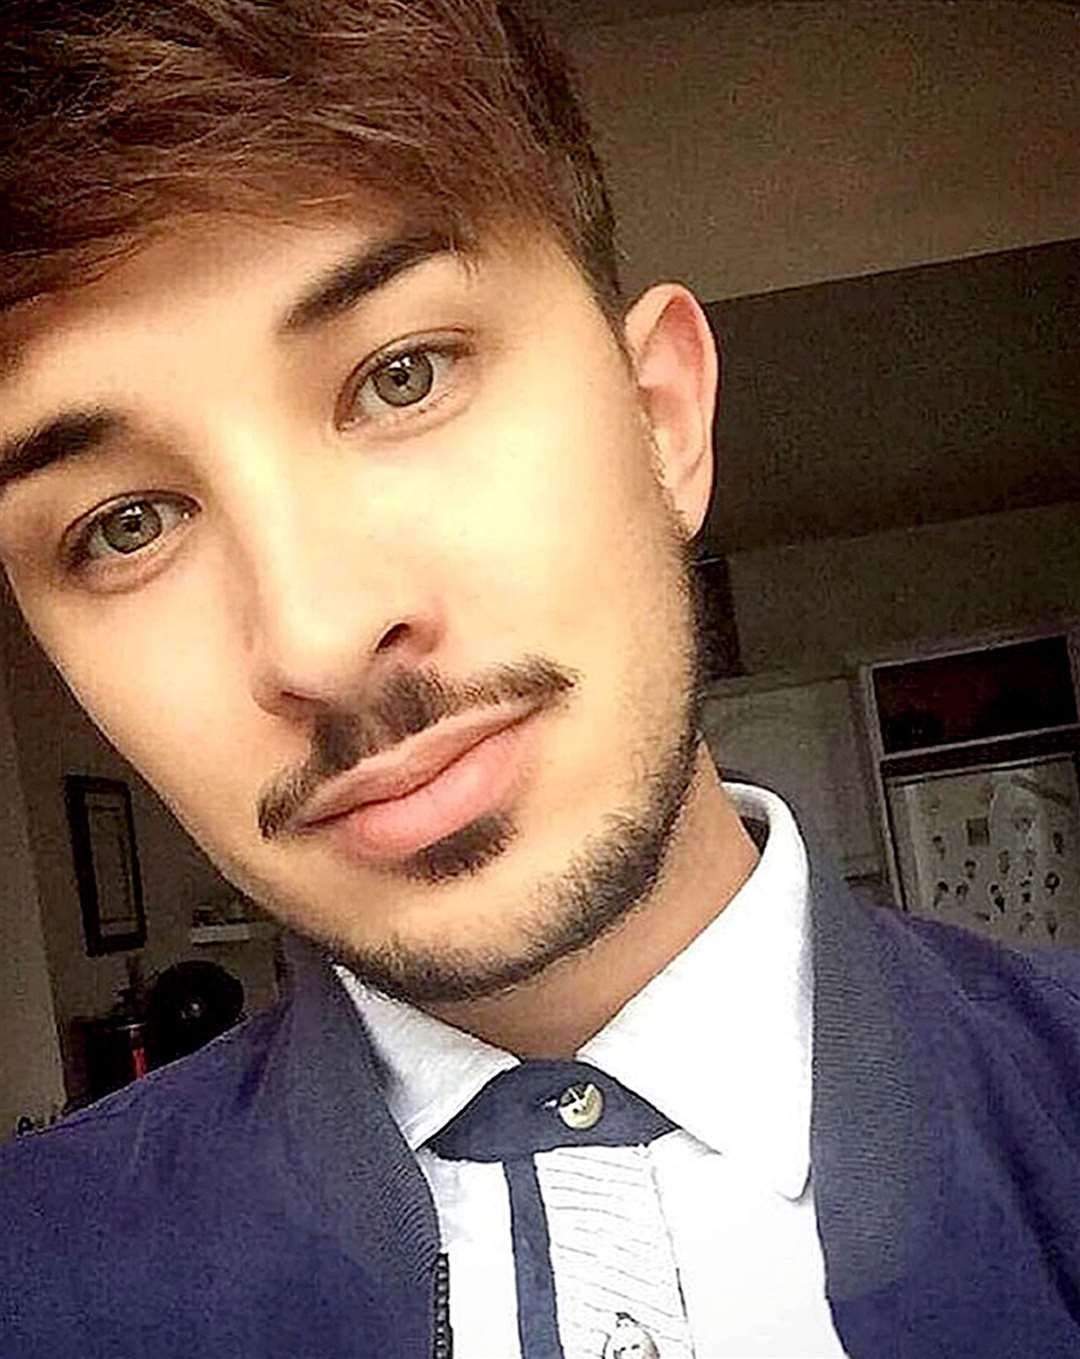 Martyn Hett was one of 22 victims killed in the Manchester Arena bombing in 2017 (Family handout via Greater Manchester Police/PA)